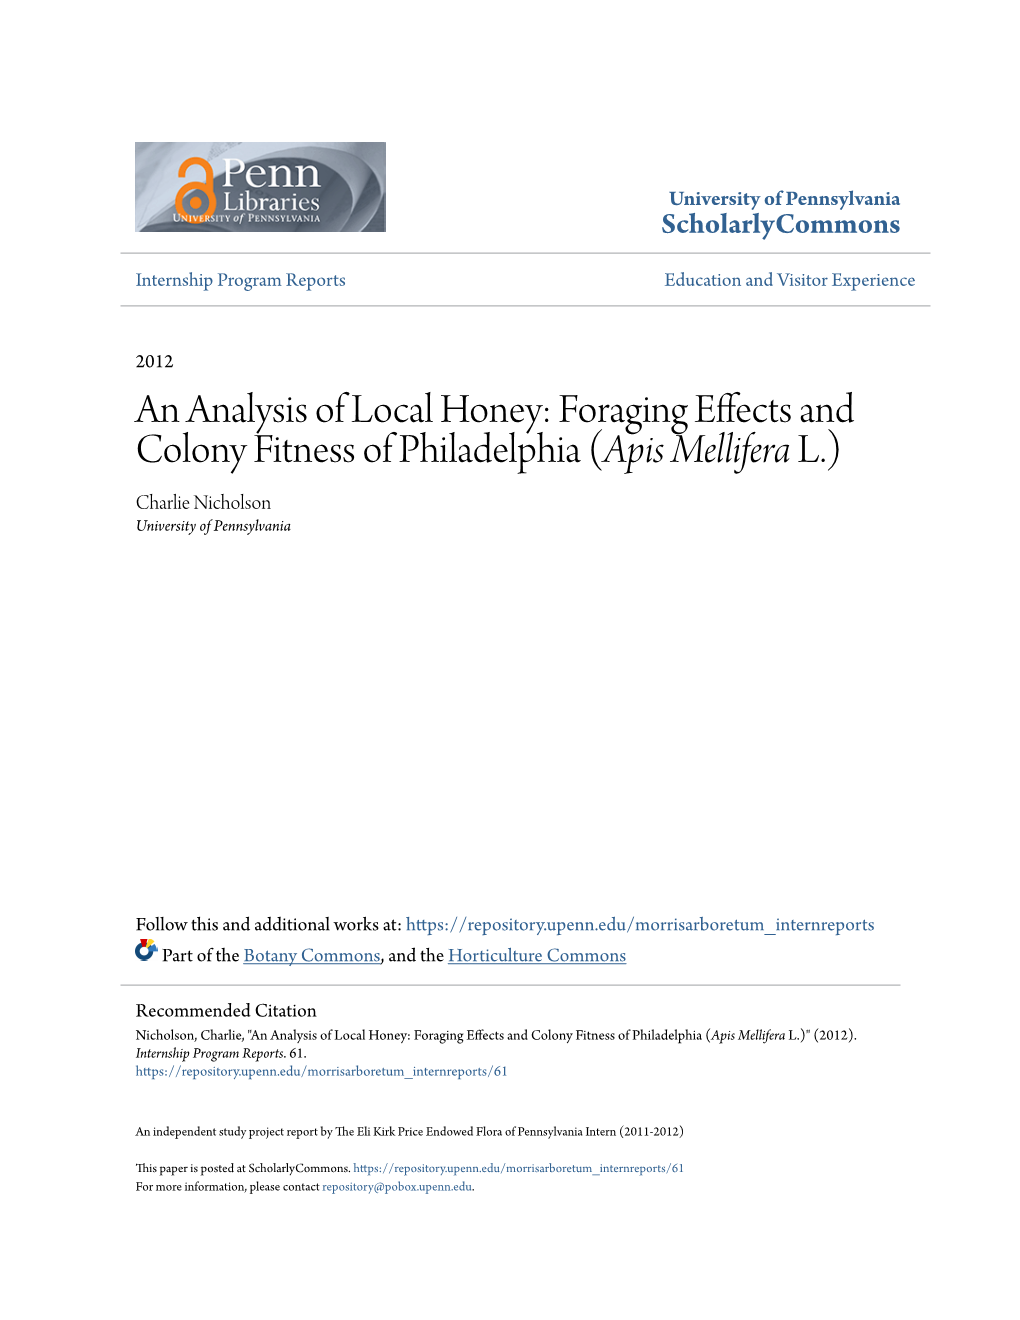 An Analysis of Local Honey: Foraging Effects and Colony Fitness of Philadelphia (Apis Mellifera L.) Charlie Nicholson University of Pennsylvania